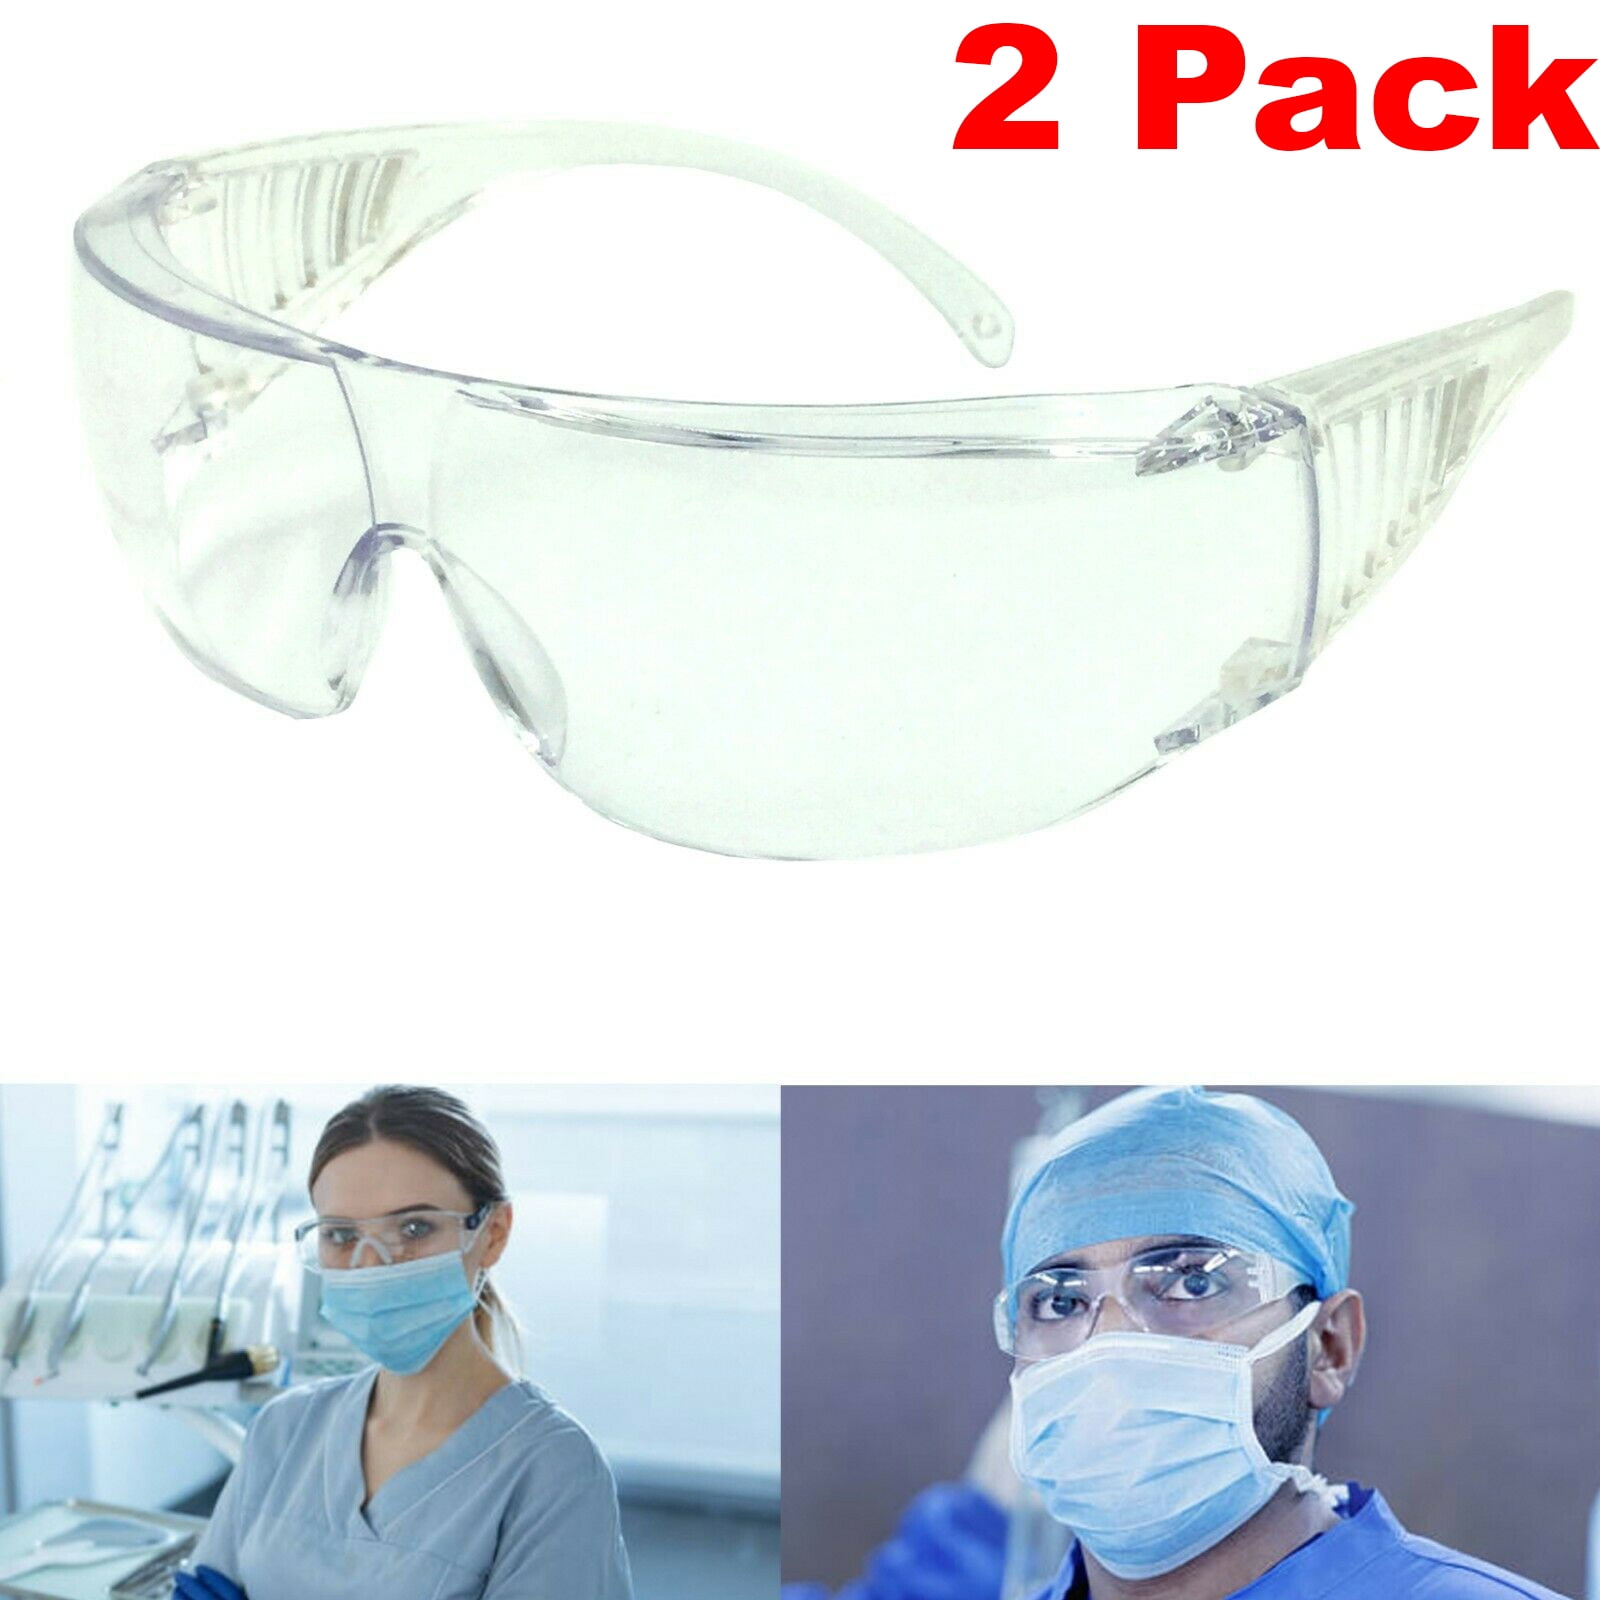 2x Medical Eye Protection Industrial Construction Laboratory Goggles Glasses PPE 